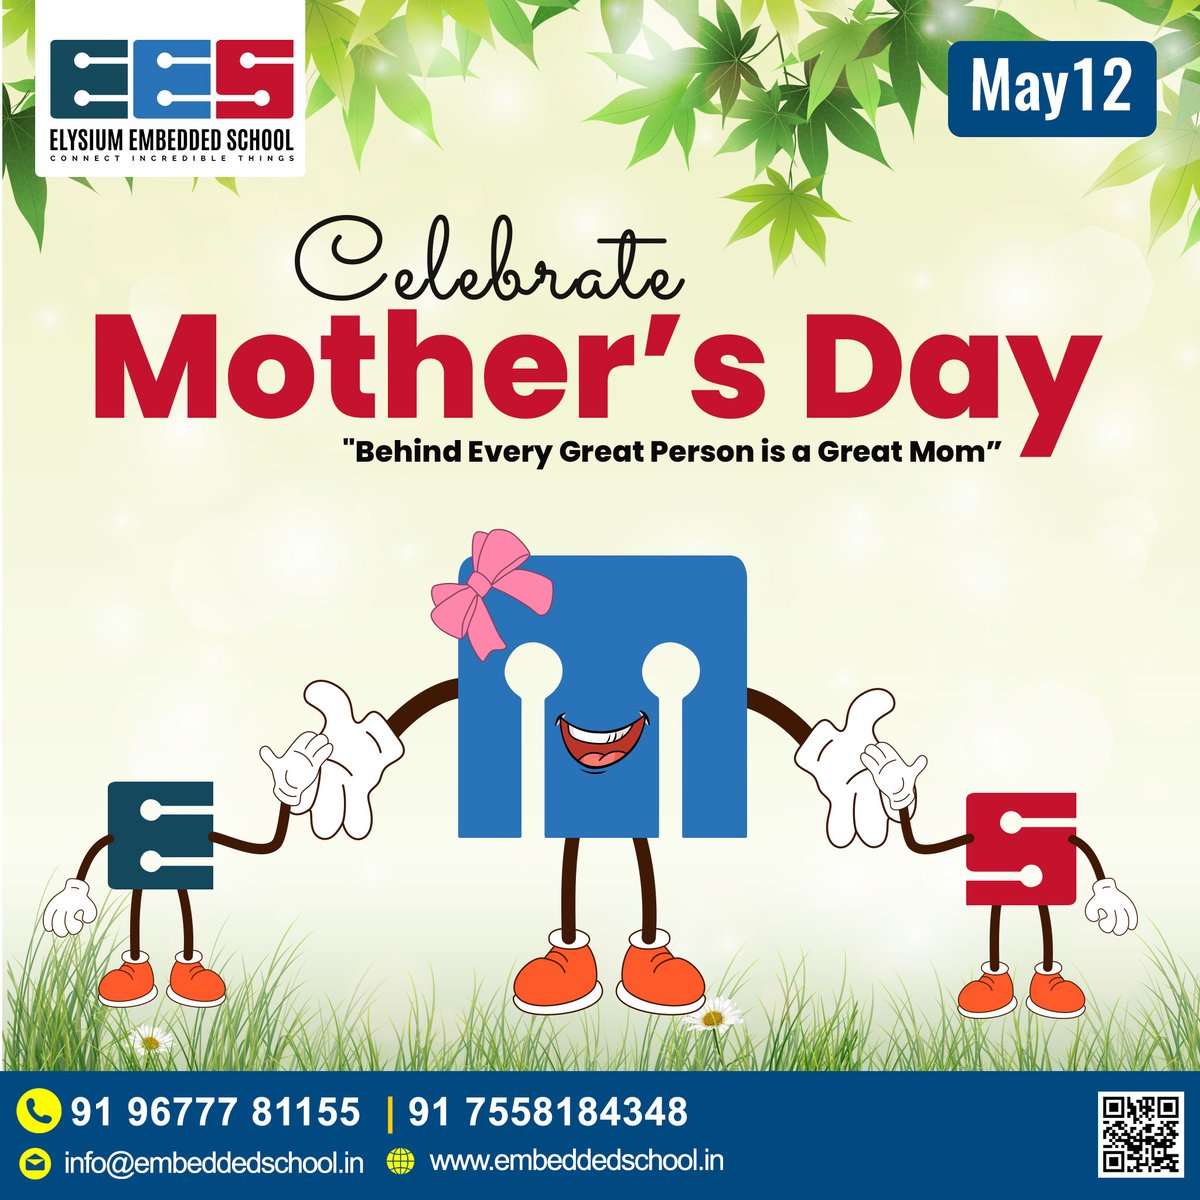 🌸 Happy Mother's Day to the amazing moms out there! 💖 #MomLove #ElysiumEmbeddedSchool #MothersDay #ThankYouMom #CelebratingMotherhood 💻Visit our website: rfr.bz/f6enped 🌏Location: rfr.bz/f6enpee #elysiumembeddedschool #no1trainingacademy #embeddedschool